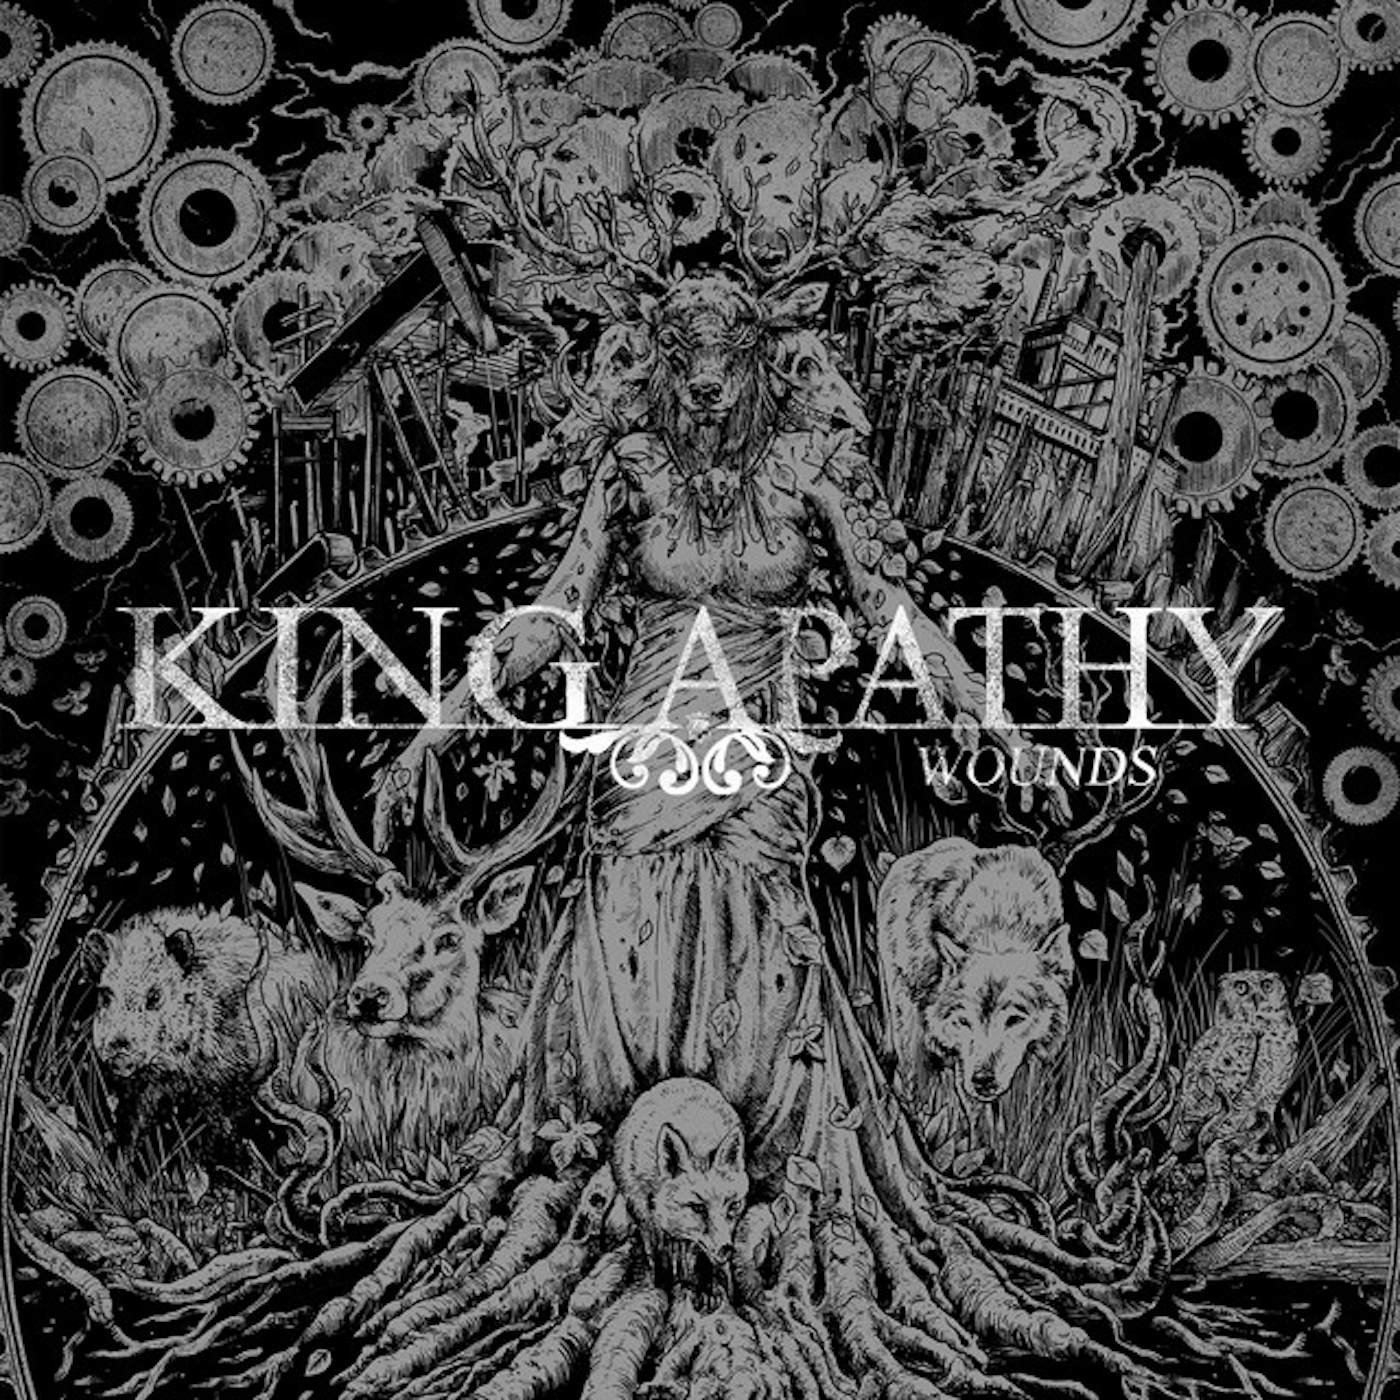 King Apathy Wounds Vinyl Record